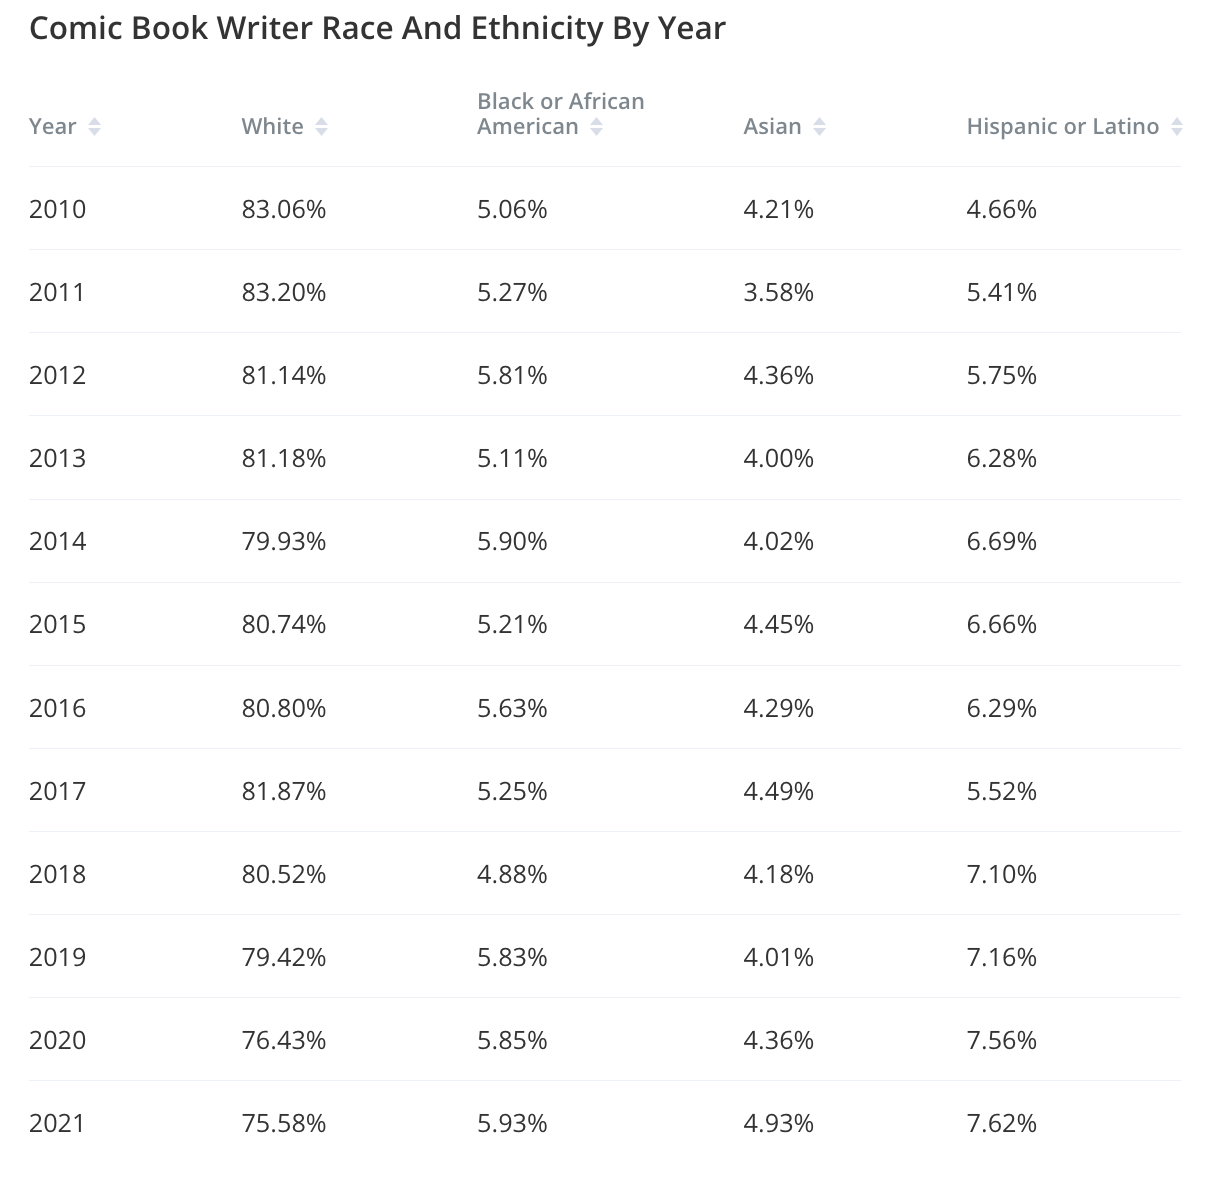 Comic Book Writer Race and Ethnicity by Year